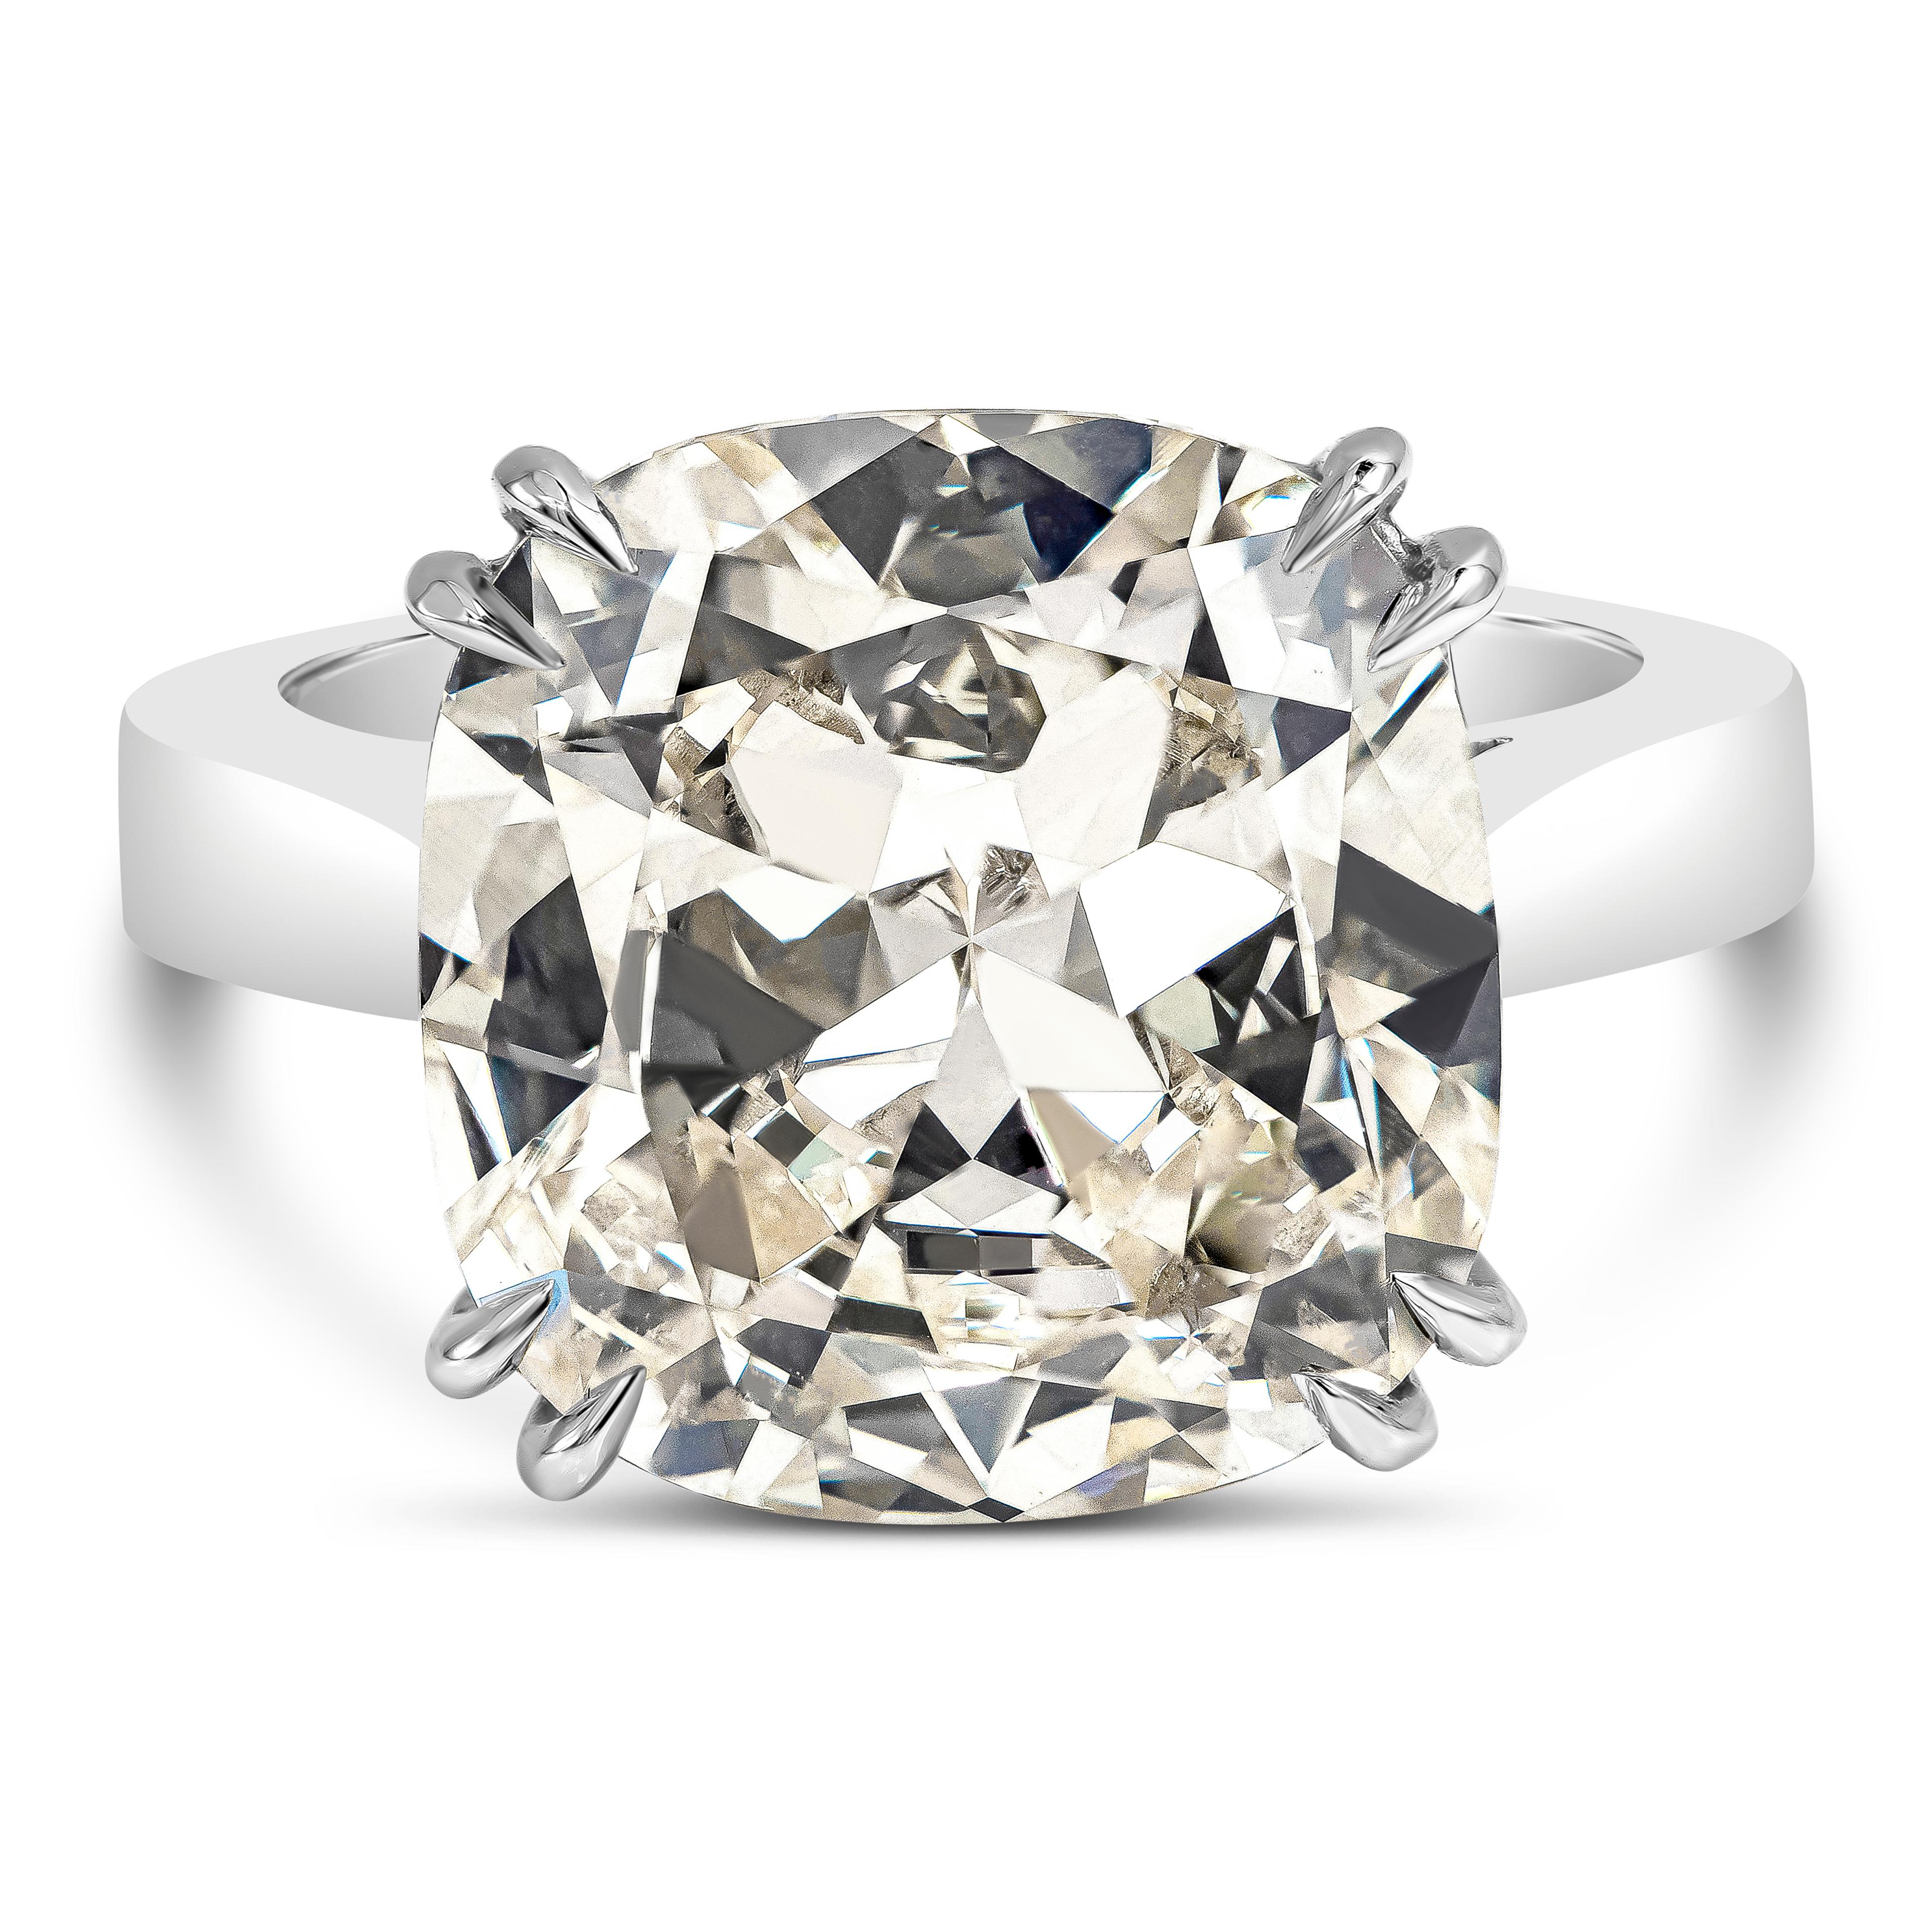 This is an absolutely unique piece. It features a 10.05 carat cushion cut diamond set in a double eagle prong platinum setting. Because of the strong blue fluorescence of this ring, it looks colorless (D color) in natural daylight. It only has a